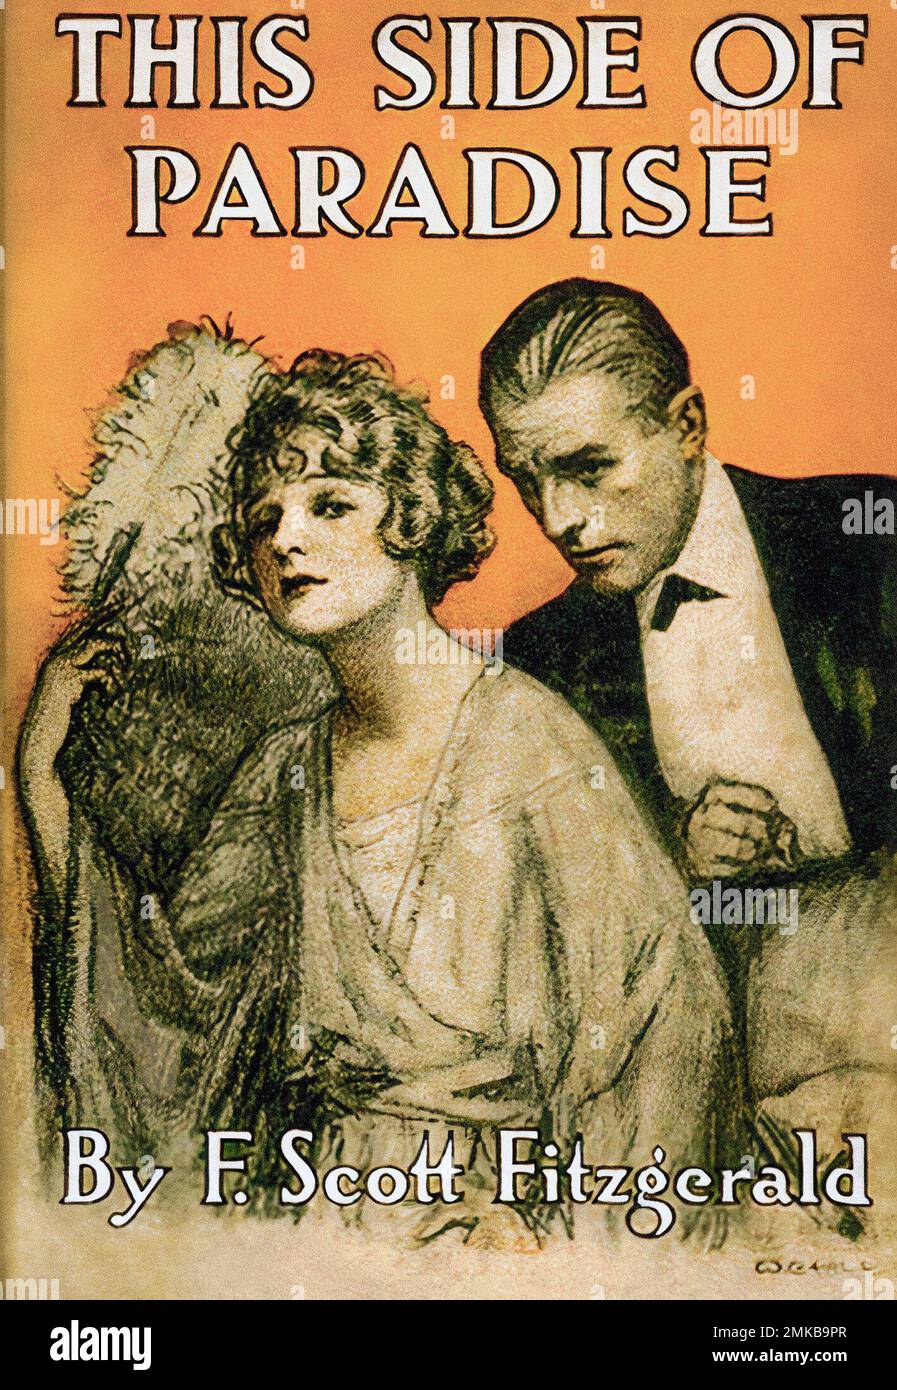 This Side of Paradise by F Scott Fitzgerald Book Cover Stock Photo